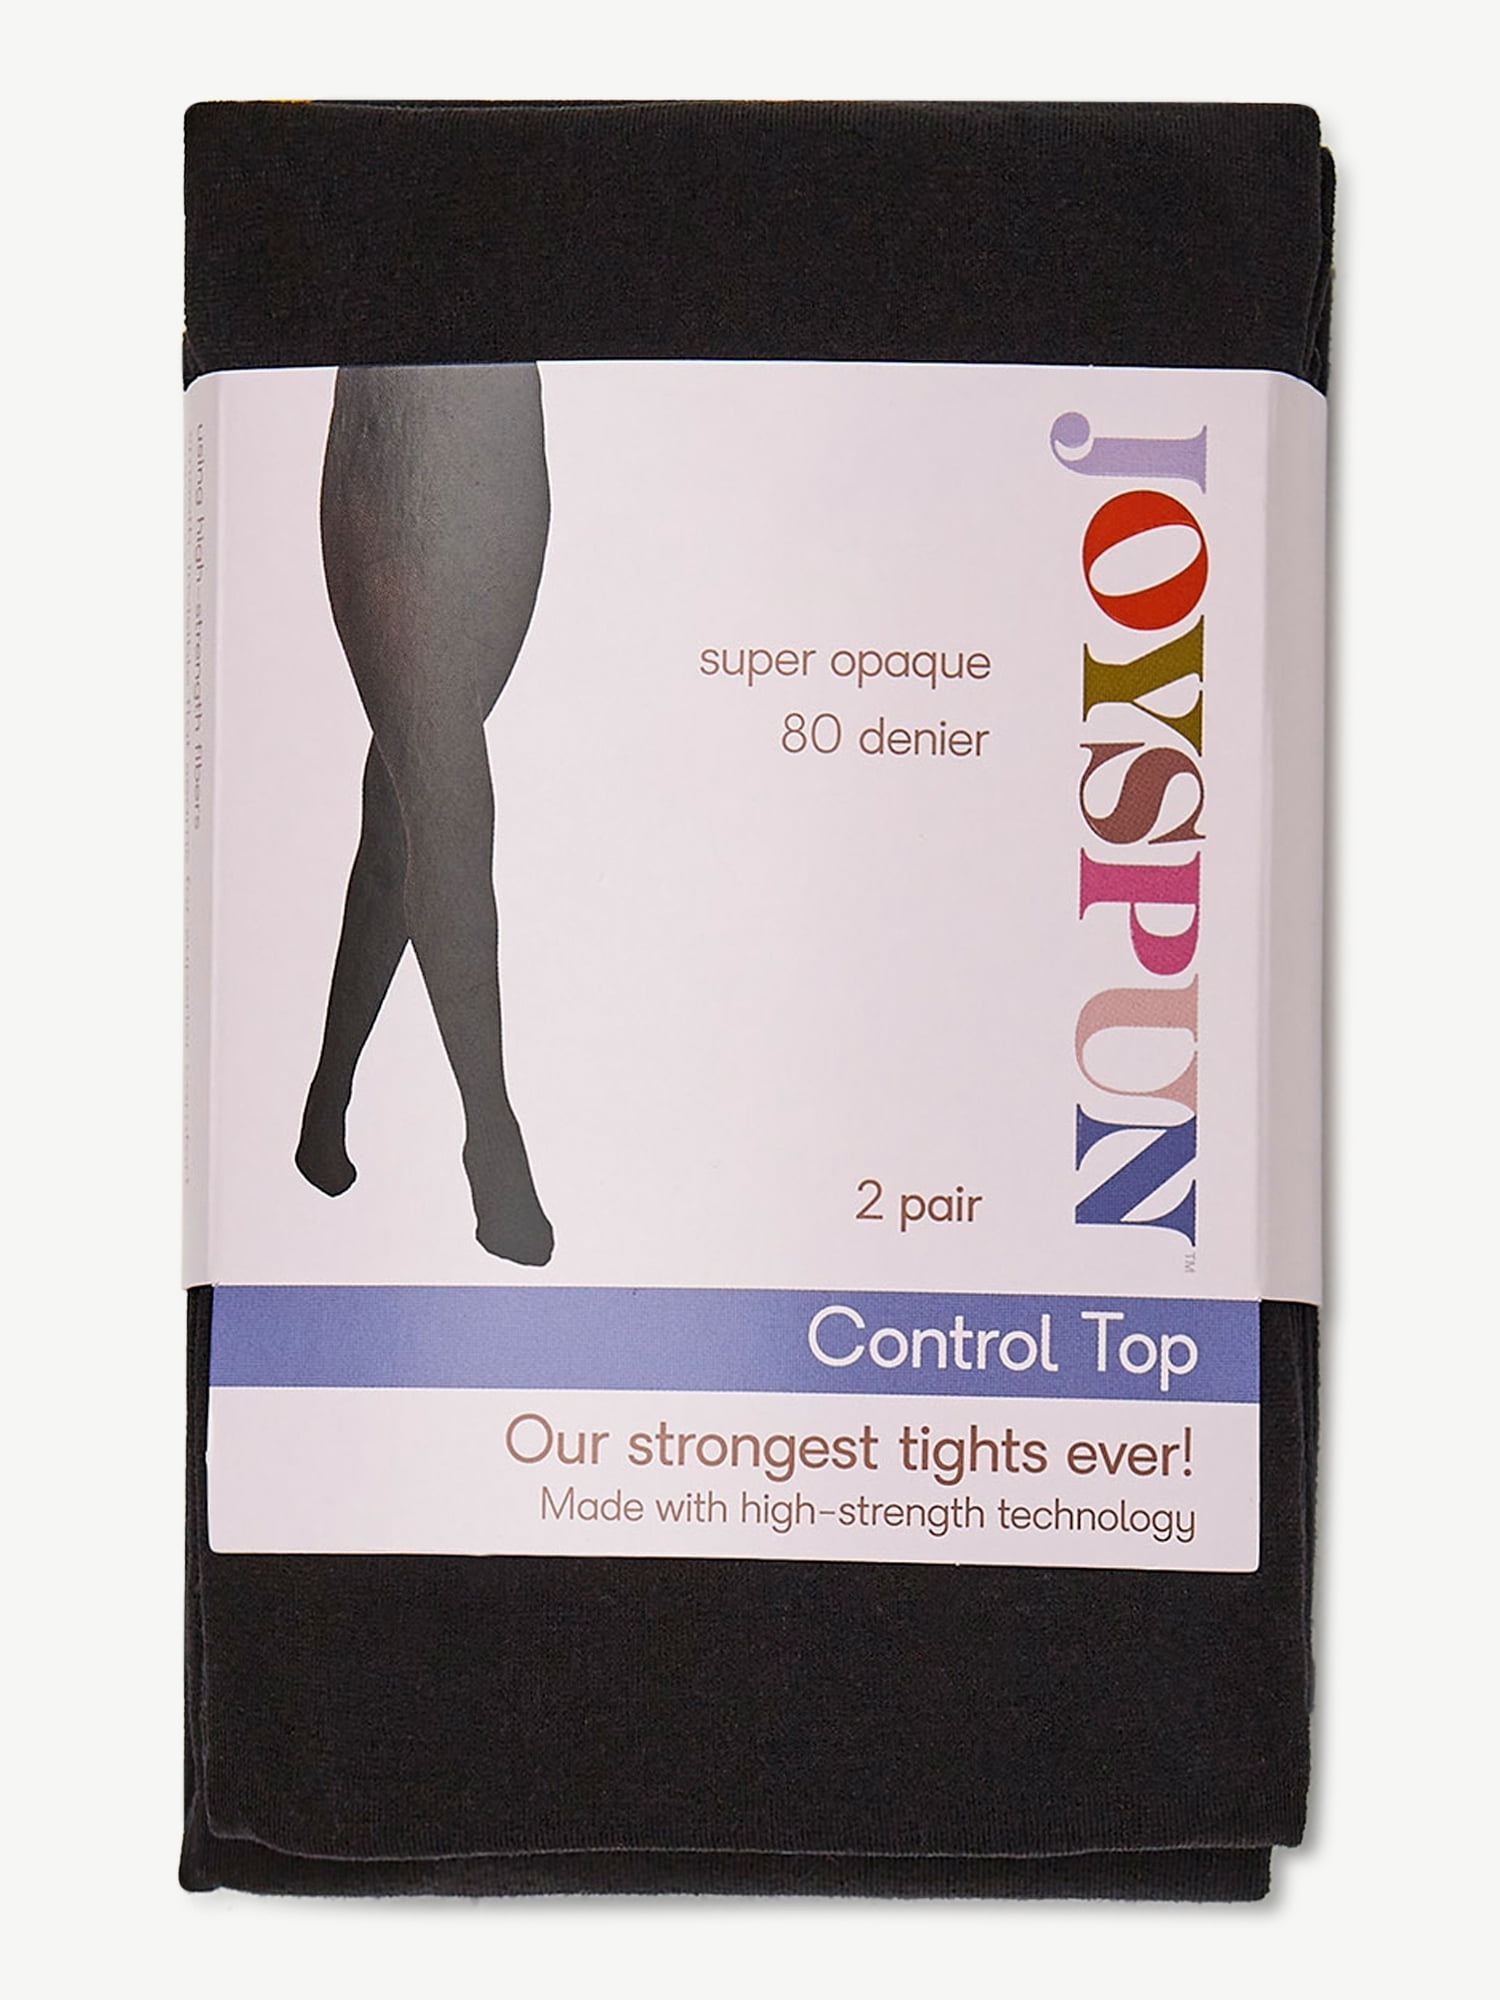 Joyspun Women's Floral and Opaque Sheer Tights, 2-Pack, Sizes S to 2XL 